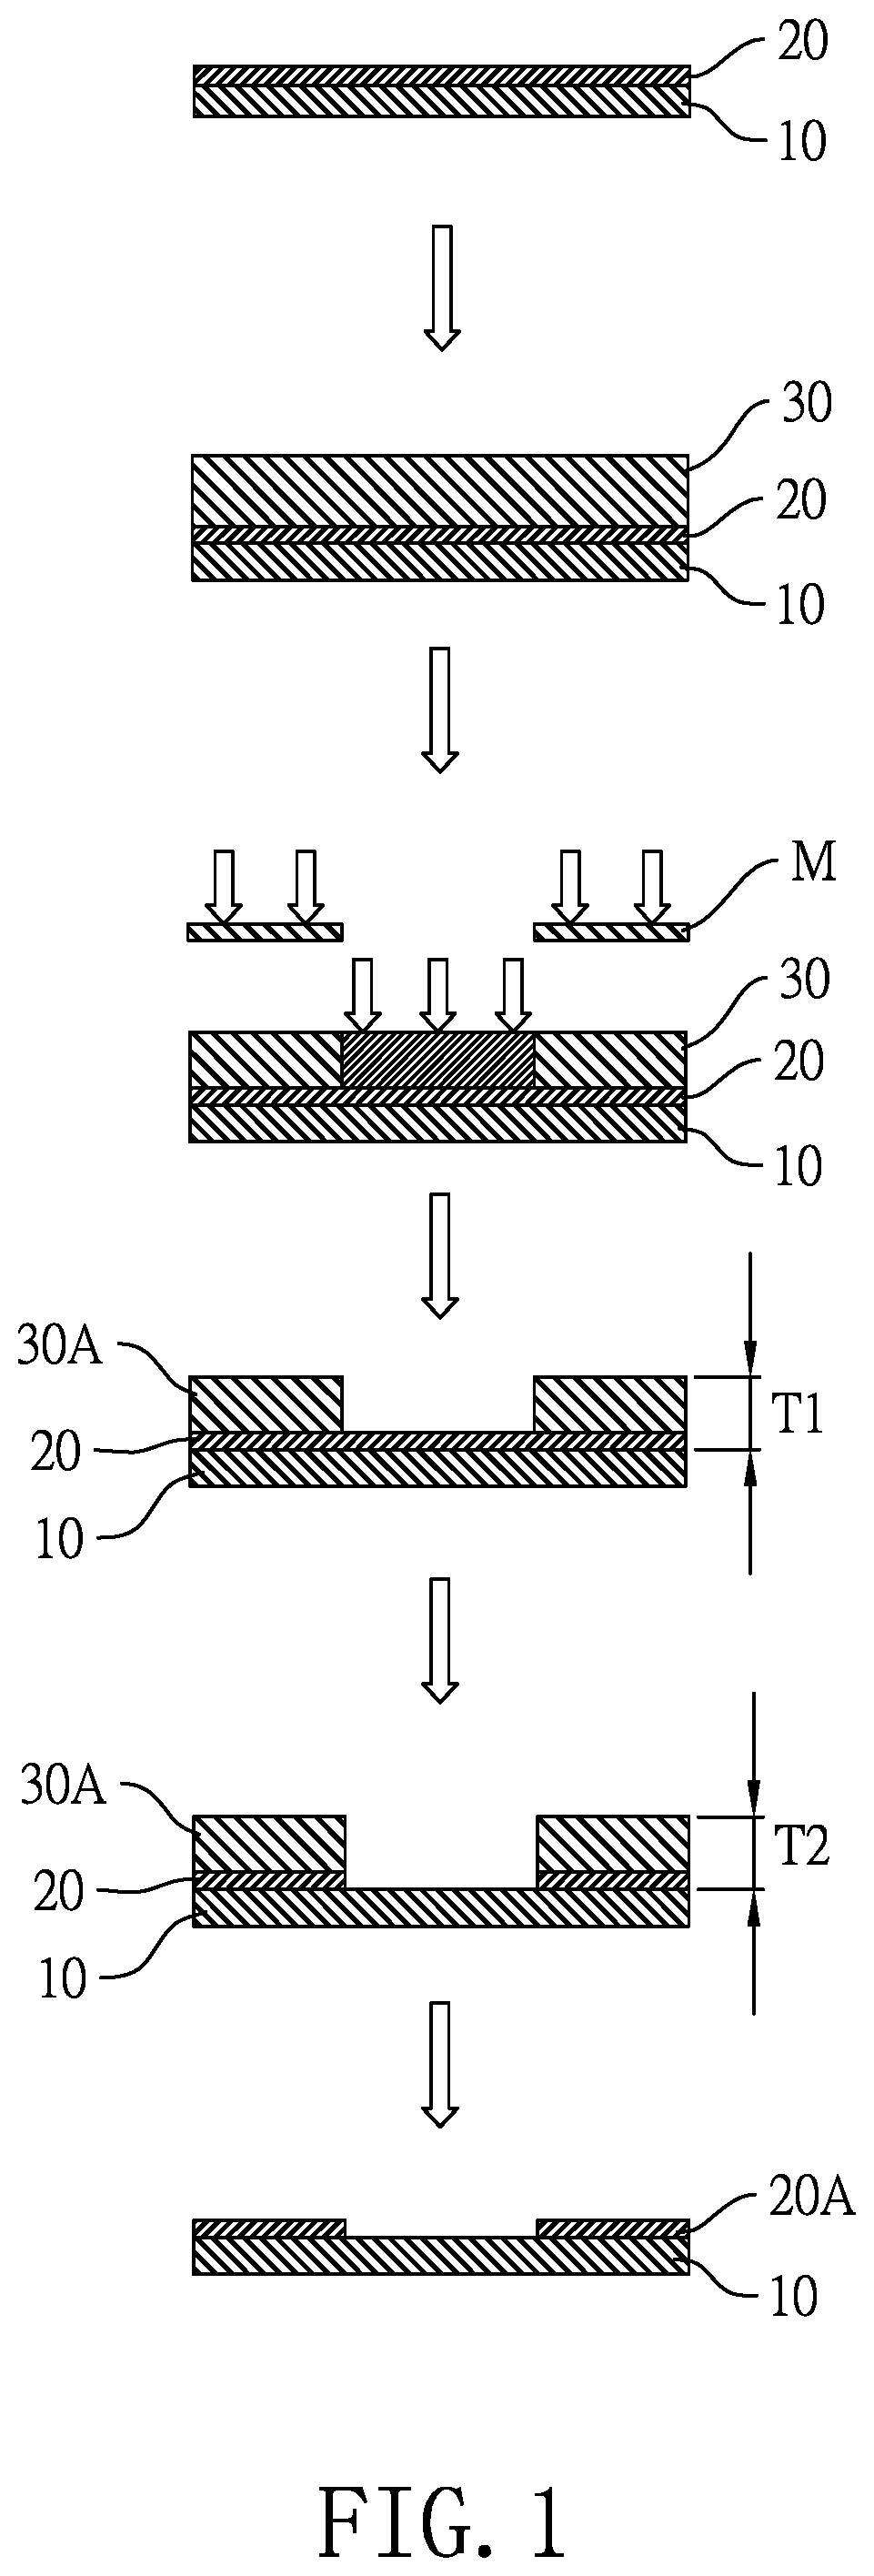 Positive photoresist composition and method of forming patterned polyimide layer